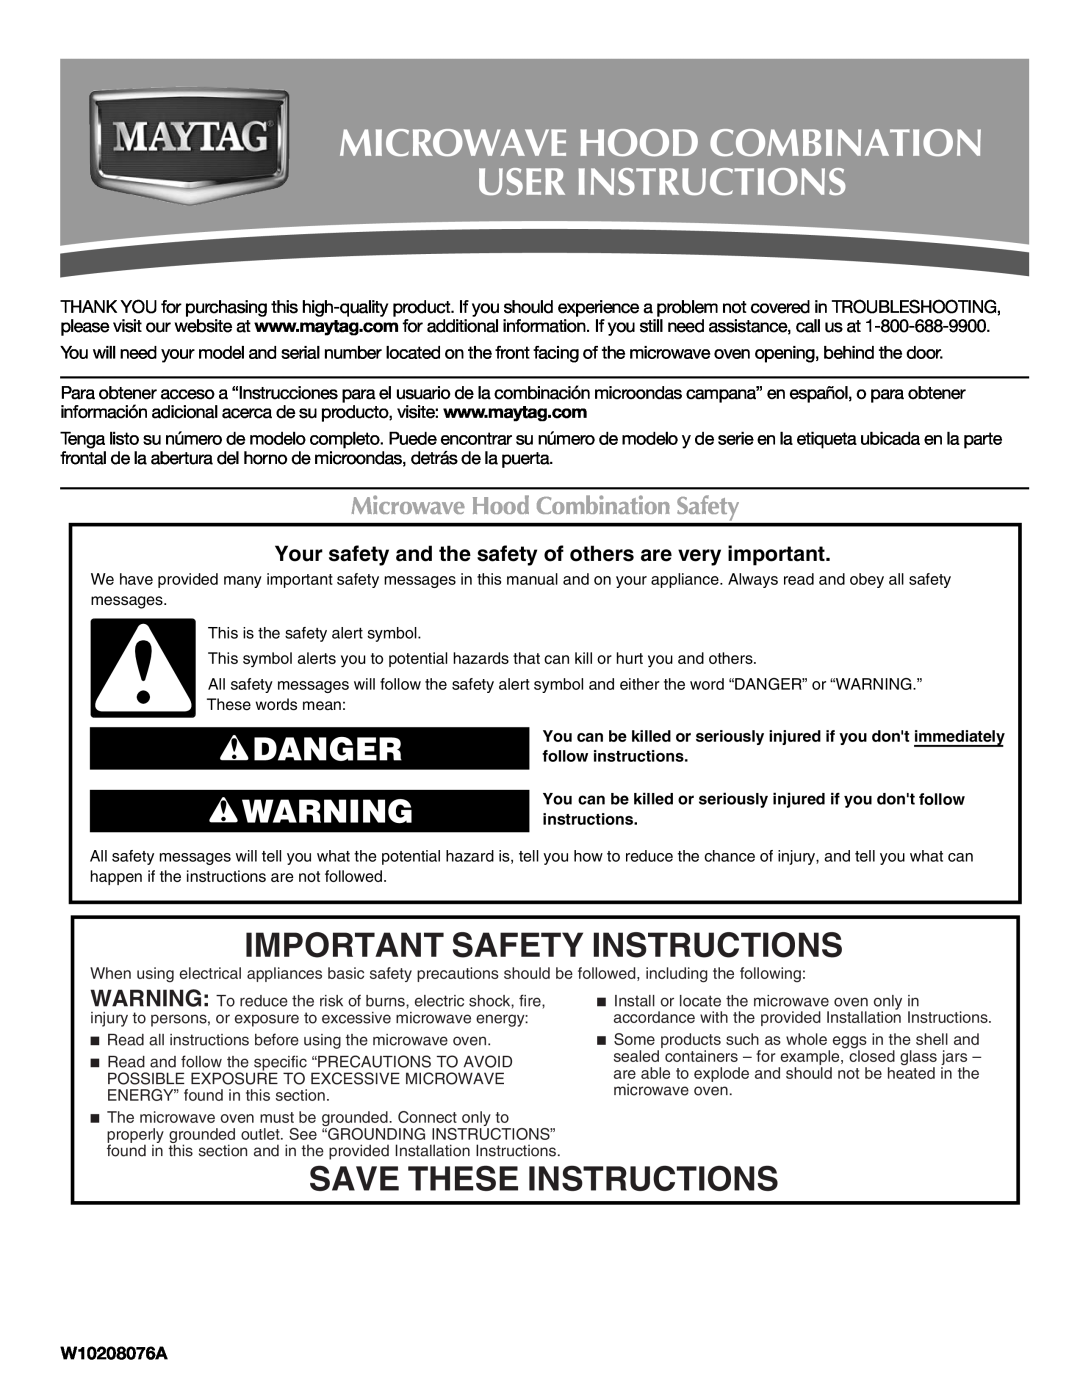 Maytag W10208080A important safety instructions Important Safety Instructions, Save These Instructions, W10208076A, Danger 